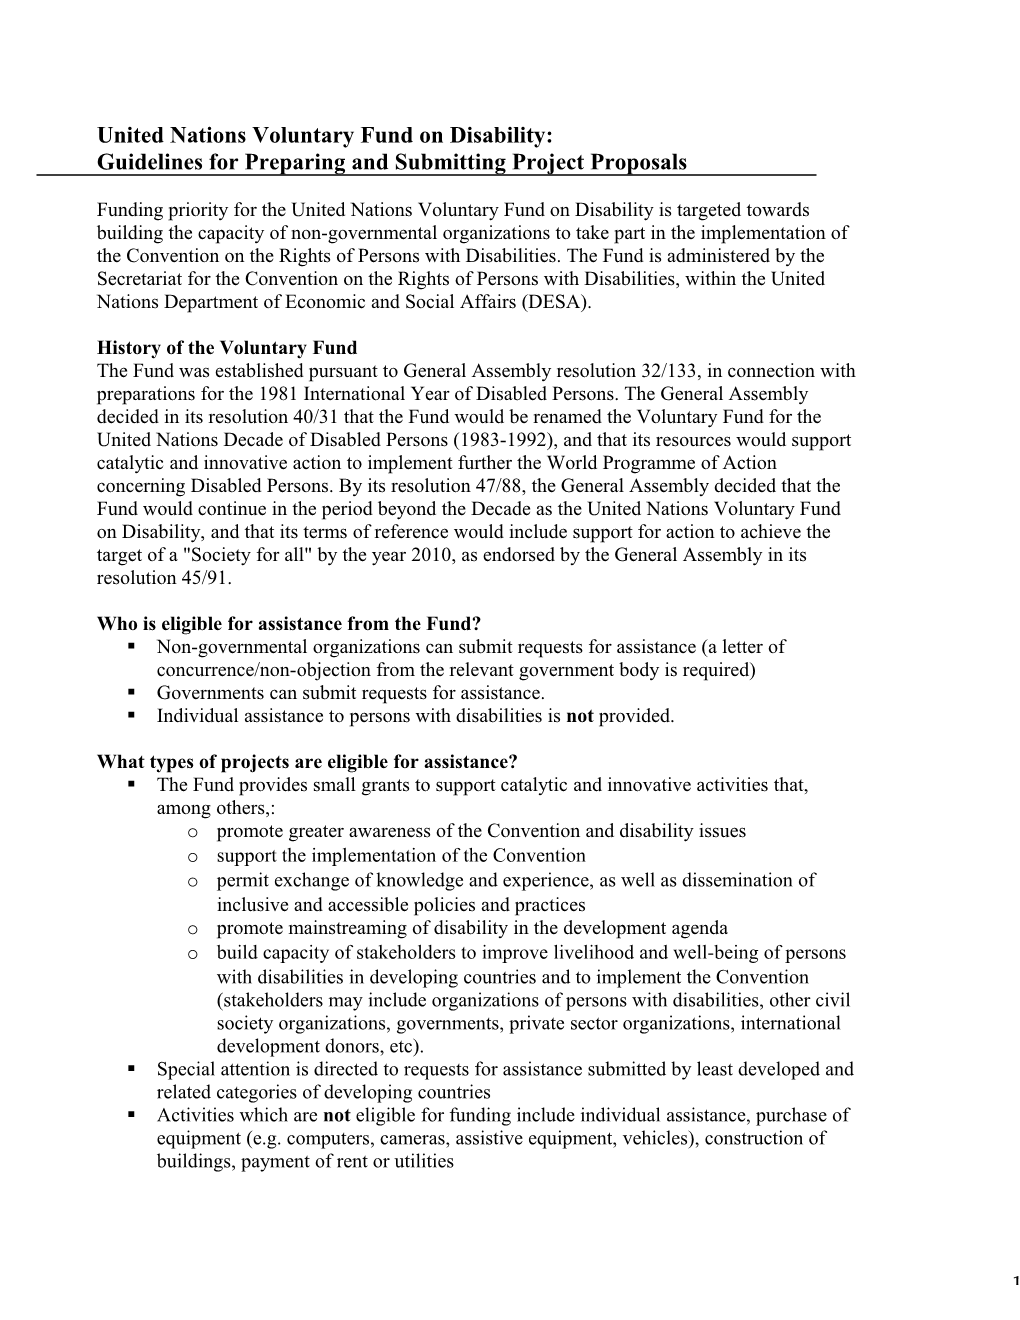 Guidelines for Preparing and Submitting Project Proposals